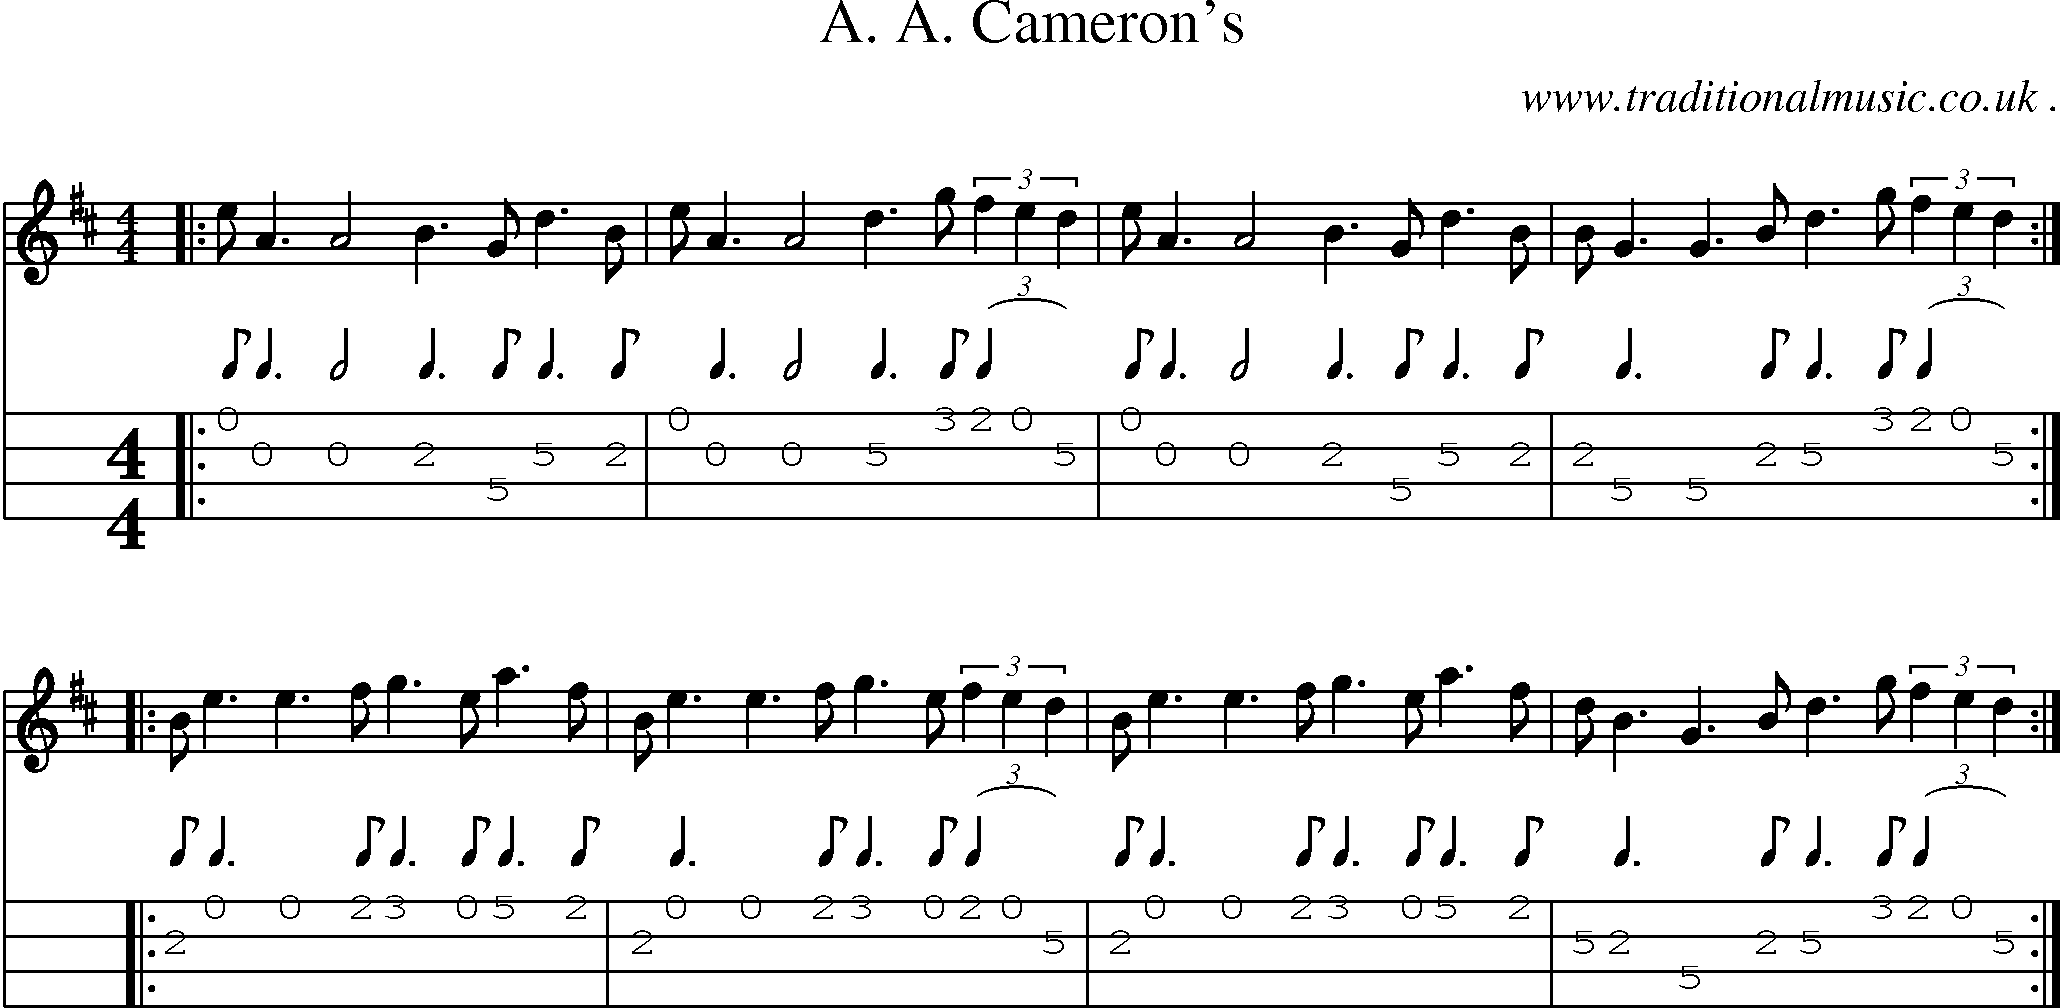 Sheet-music  score, Chords and Mandolin Tabs for A A Camerons